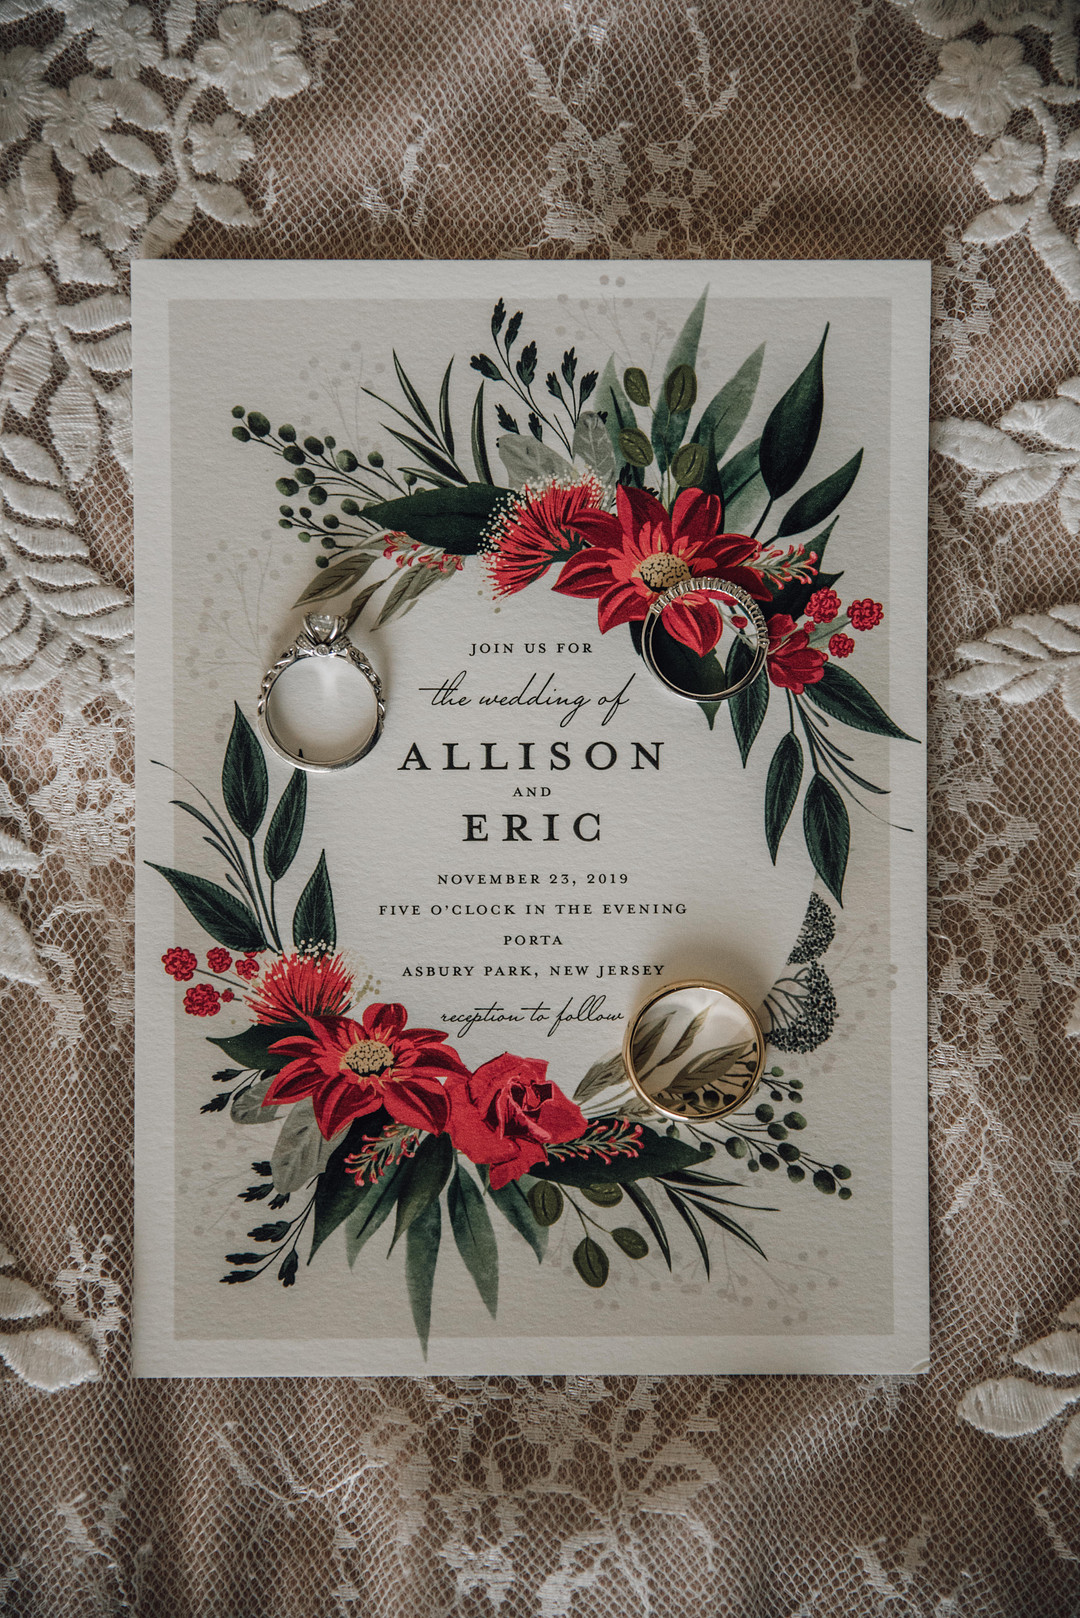 The wedding stationery was done with greenery and bright floral prints